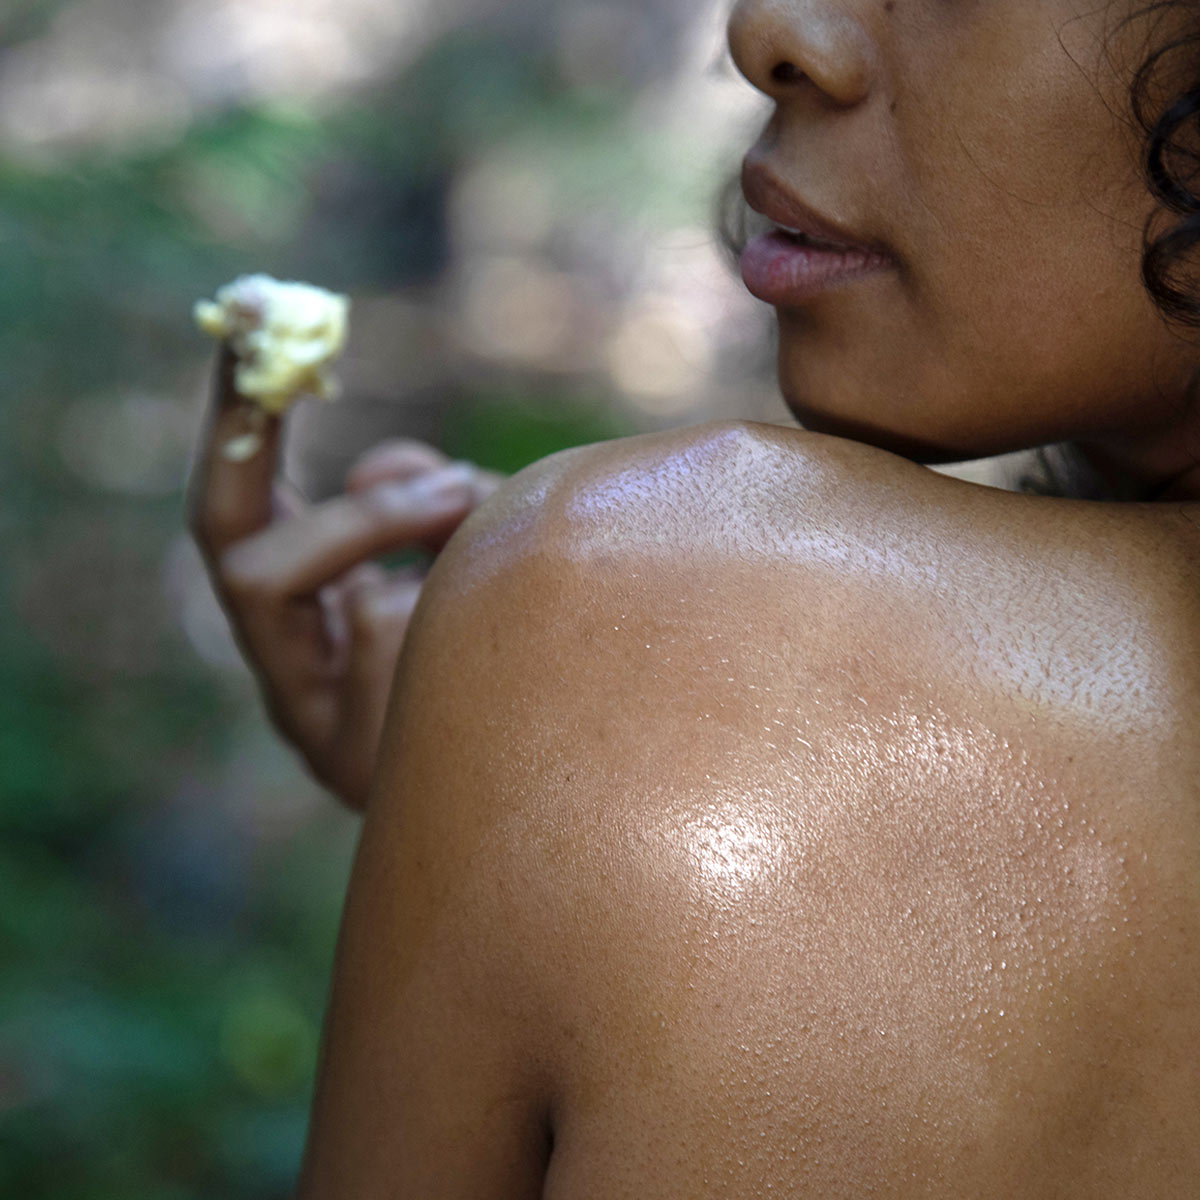 model with shea butter clump on fingertip to apply moisturizer to shoulder